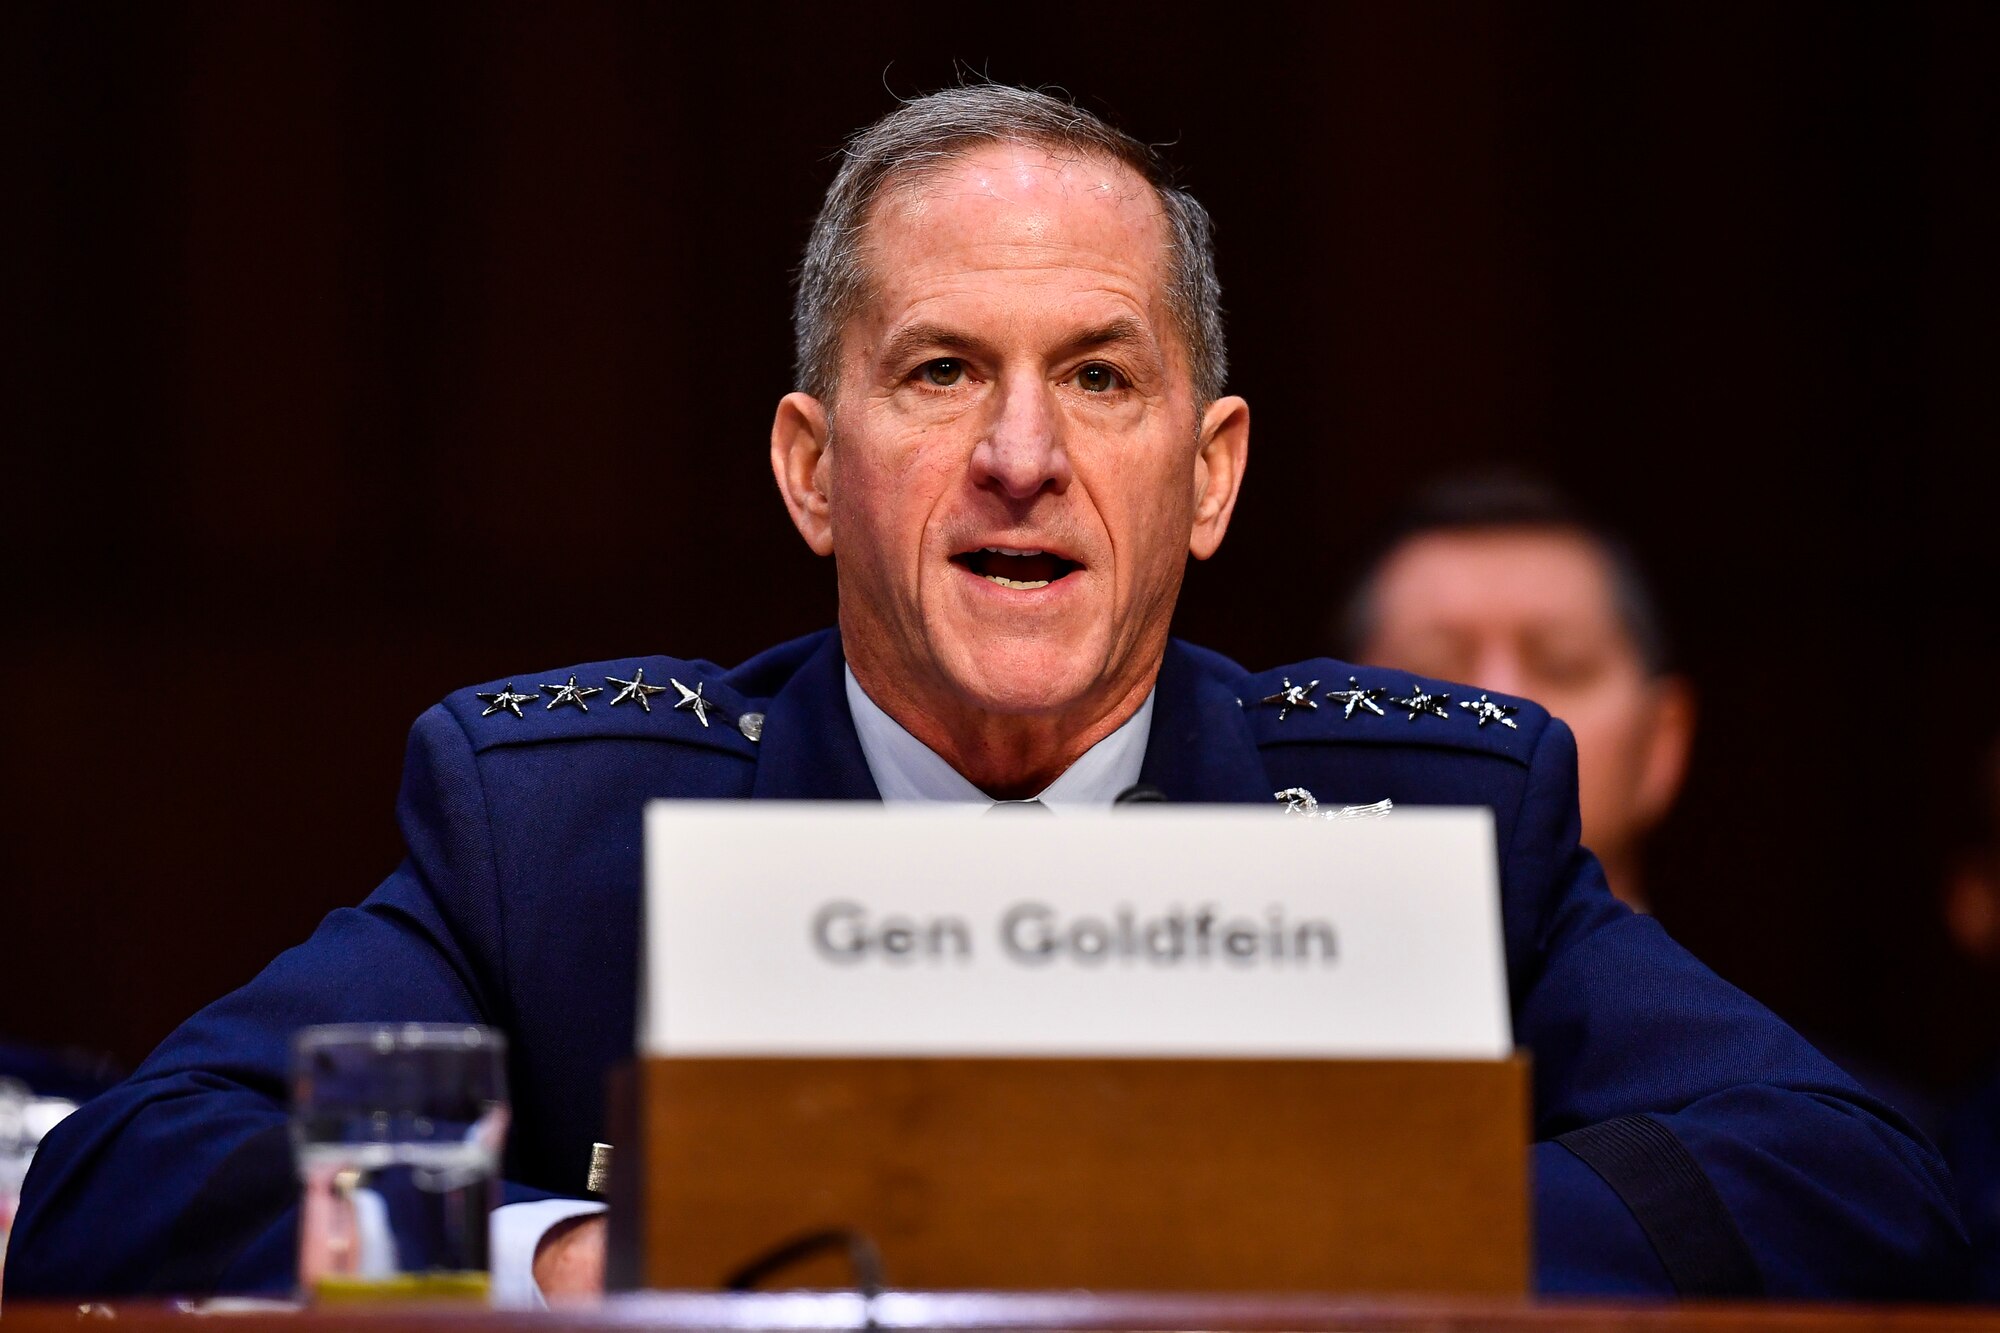 Air Force Chief of Staff Gen. David L. Goldfein testifies on the posture of the Air Force before the Senate Armed Services Committee at the Hart Senate Office Building in Washington, D.C., March 3, 2020. (U.S. Air Force photo by Eric Dietrich)